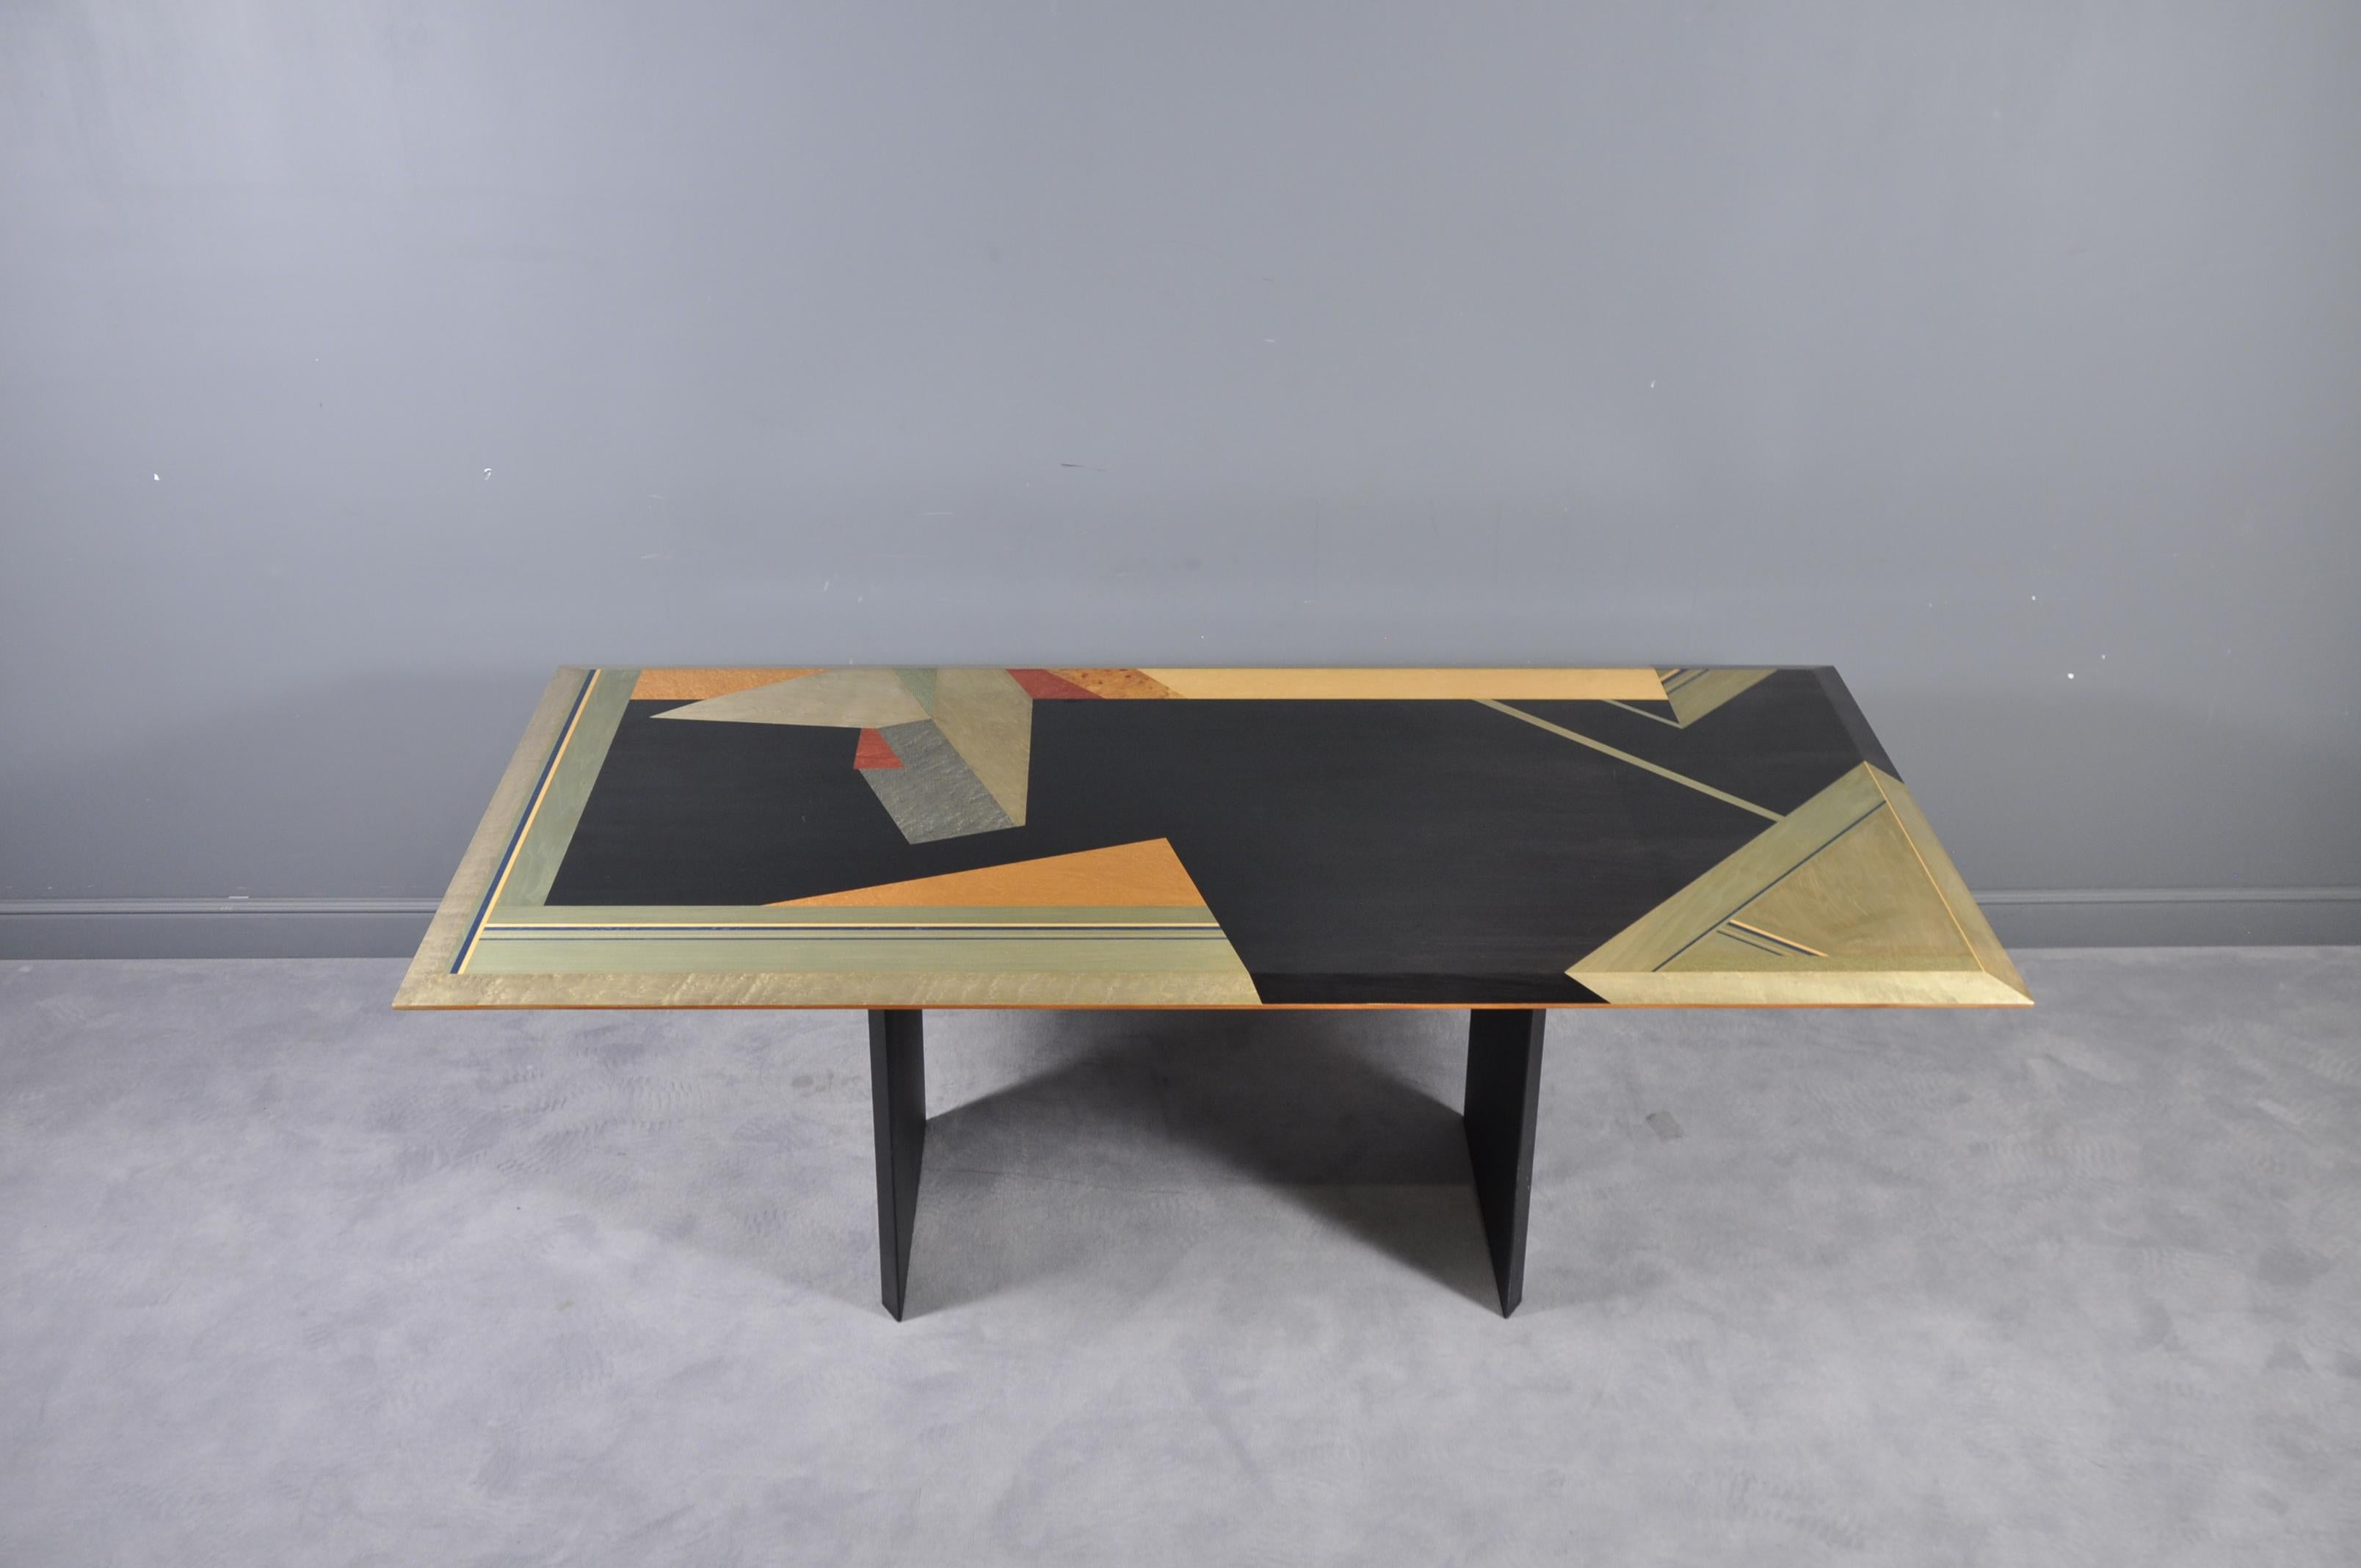 The structure is in black matte wood and the tabletop has a geometric bird's eye maple veneer and burl wood inlays, high gloss lacquer wood top table.